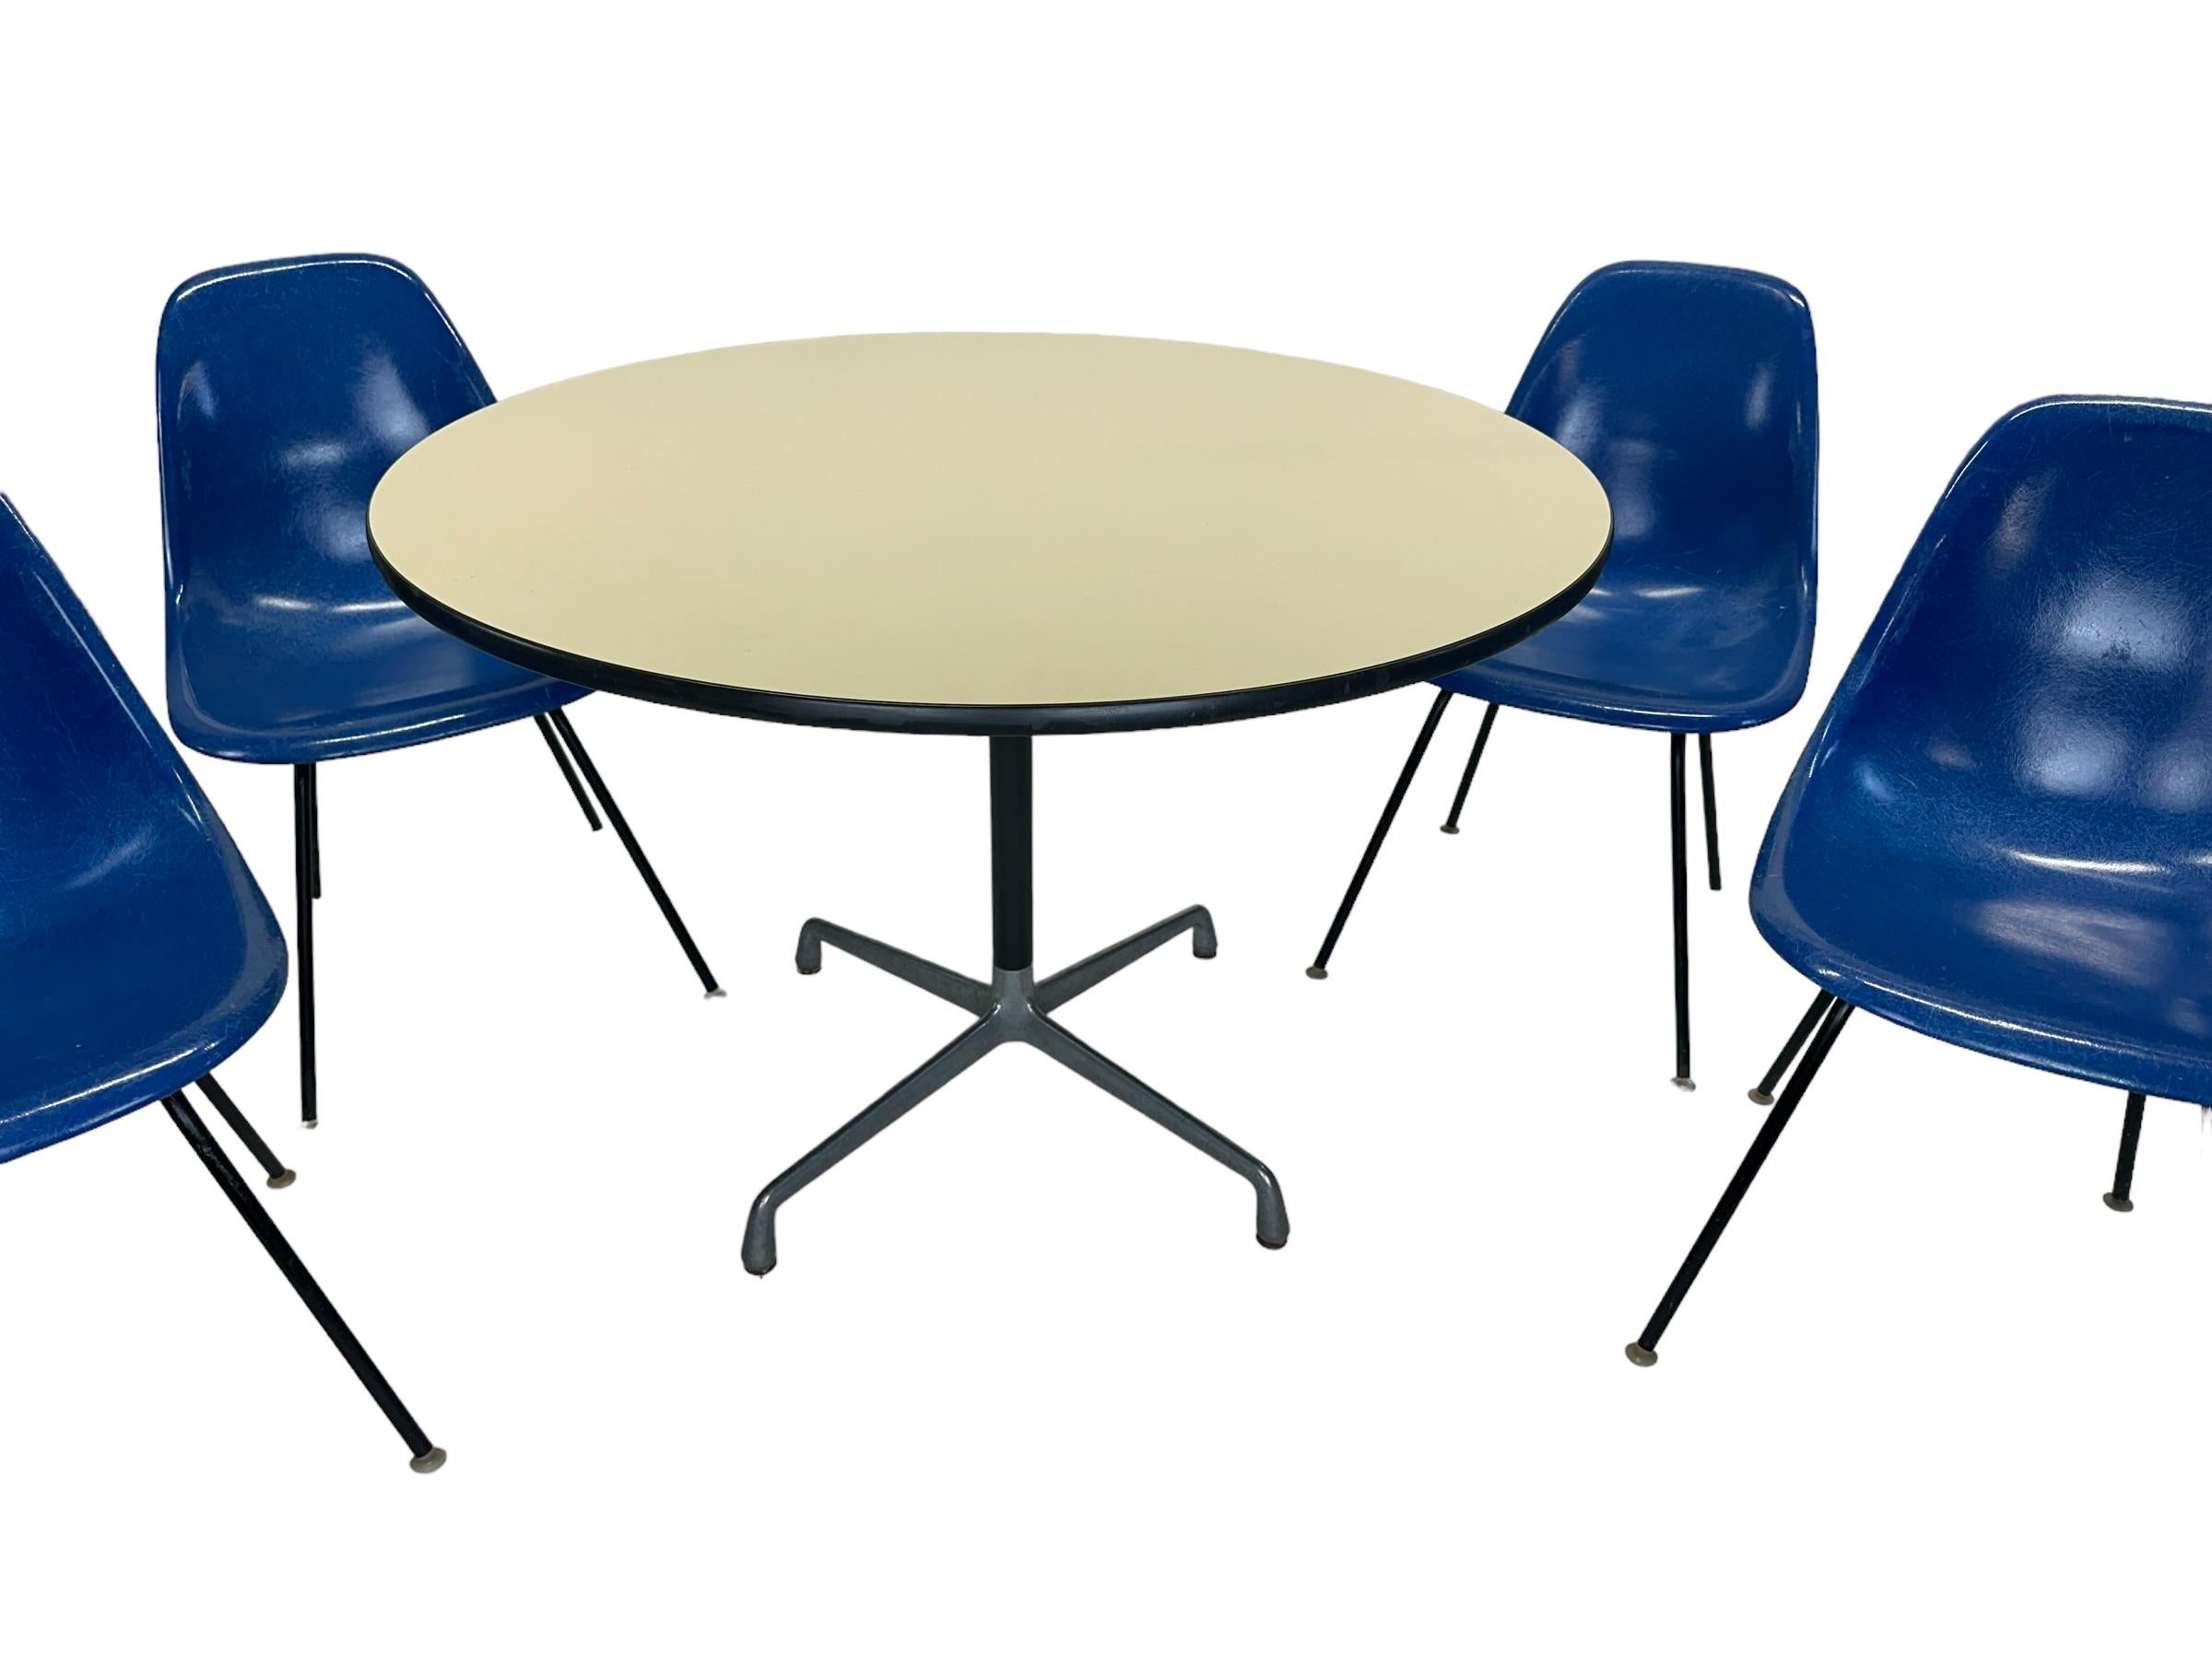 Beautiful vintage Herman Miller Eames dining set. Featuring 48 inch diameter round dining table with four matching fiberglass chairs. Table and chairs all signed and guaranteed authentic Herman Miller production. Ultramarine blue chairs are a very